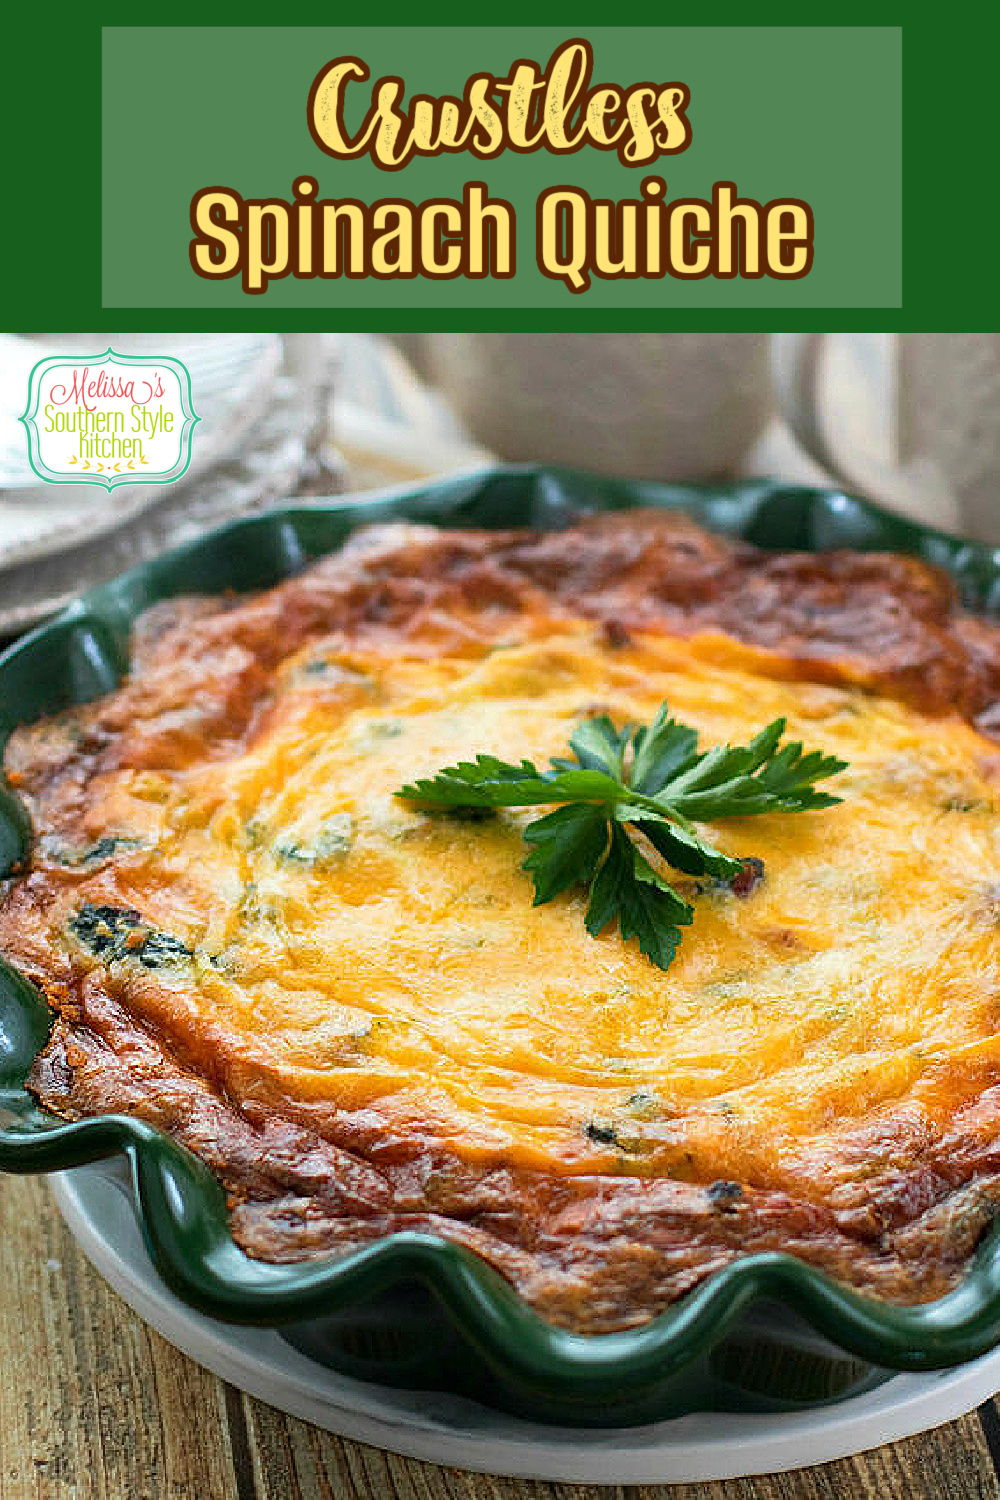 This cheesy deep dish Crustless Spinach Quiche with bacon makes a scrumptious entrée for brunch, lunch or dinner #crustlessquiche #spinachquiche #quicherecipes #bacon #spinachbaconquiche #breakfastrecipes #brunchrecipes